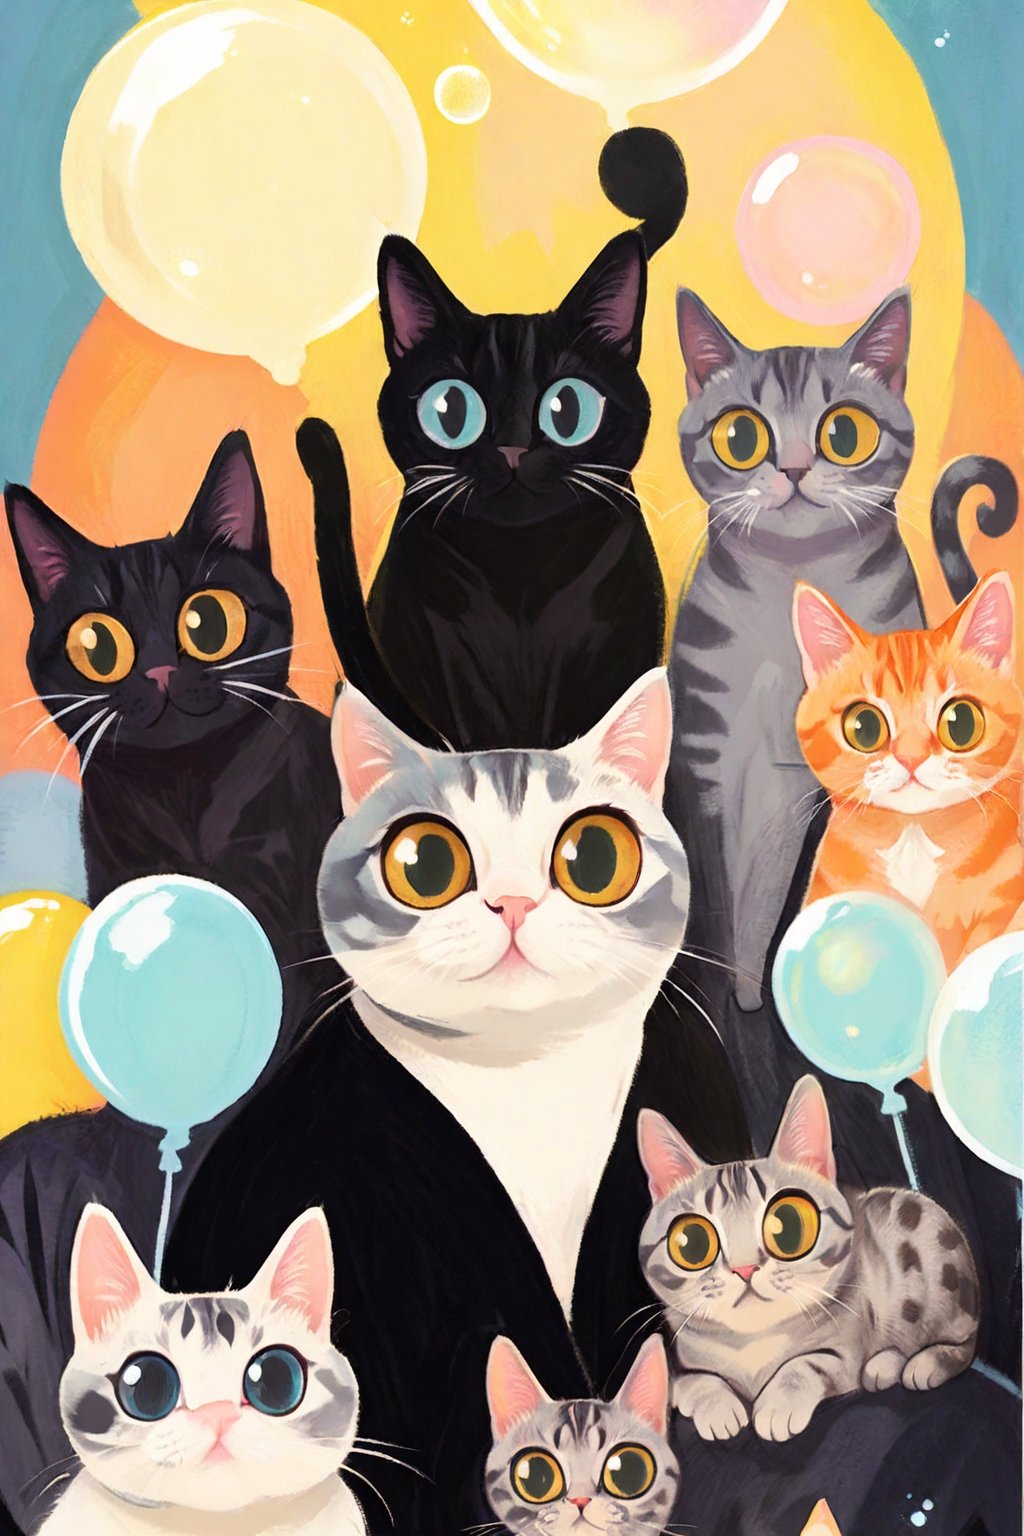 Fashion design, poster design, trendy, flat, pop style, american shorthair , There are 10 cats., bubble text, illustration, exquisite,